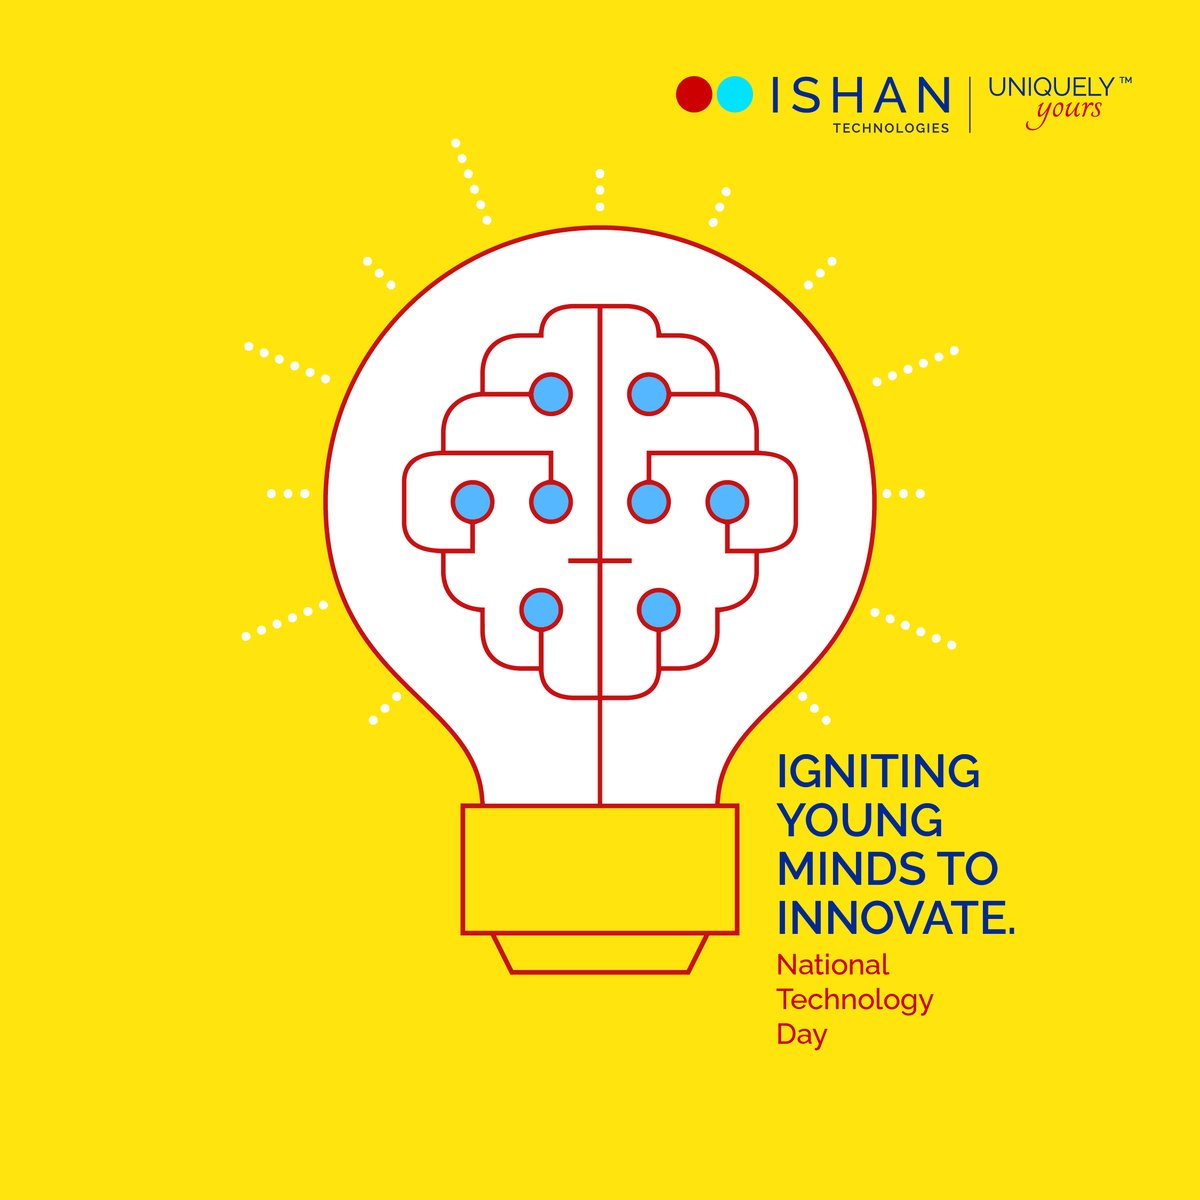 This National Technology Day, Ishan Technologies is committed to developing innovative solutions through an integrated S&T approach for a sustainable future.

#IshanTechnologies #InnovateInspire #IshanTechnologies #Ishanism #technnology #TechnologyDay